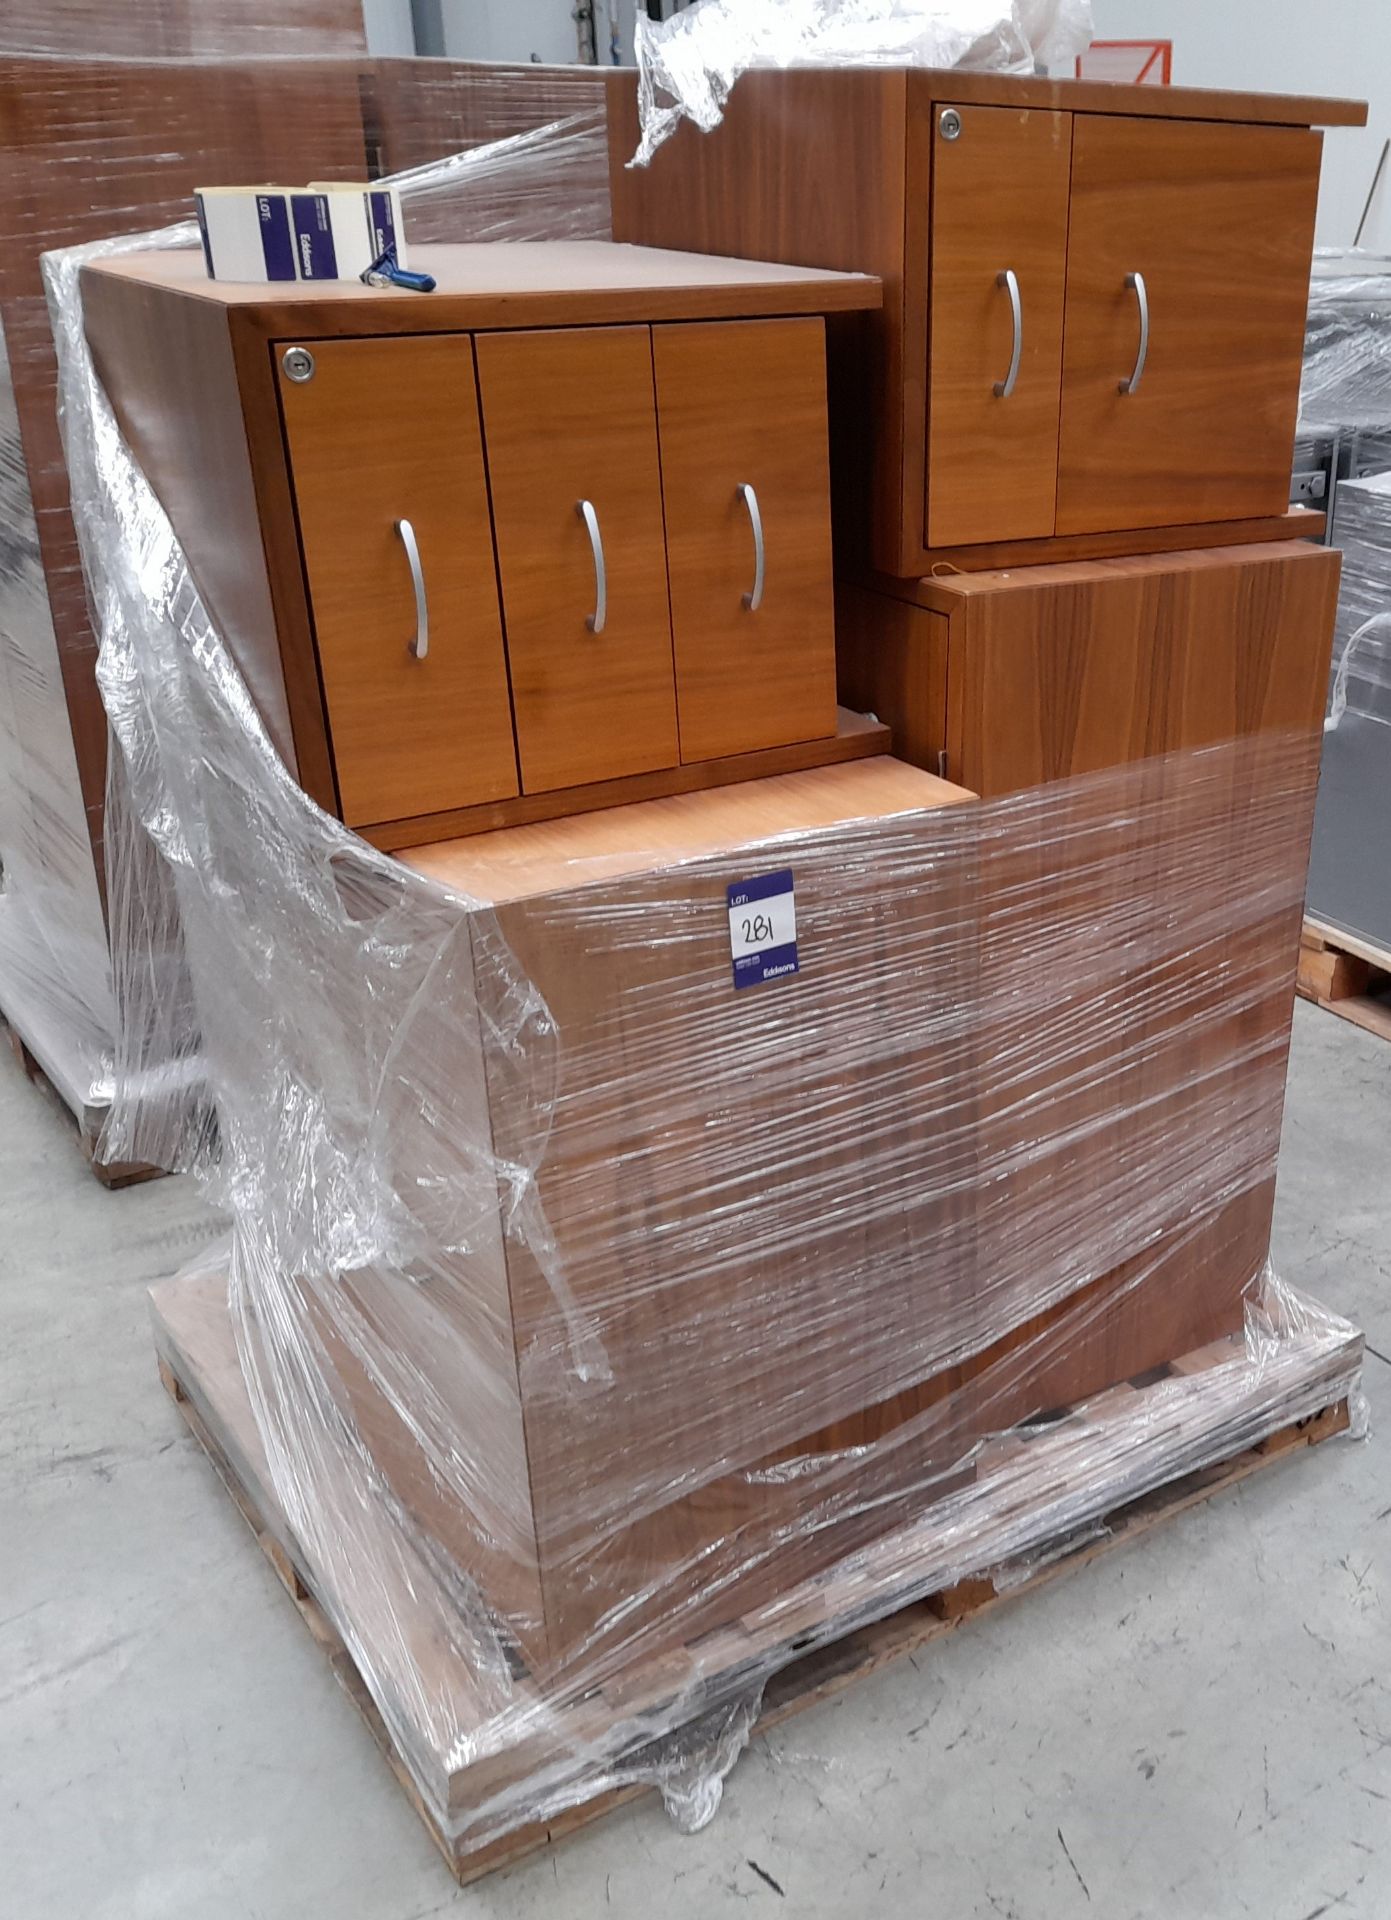 2 x Medium oak effect cabinets, with 2 x medium oak effect pedestals, as lotted to pallet